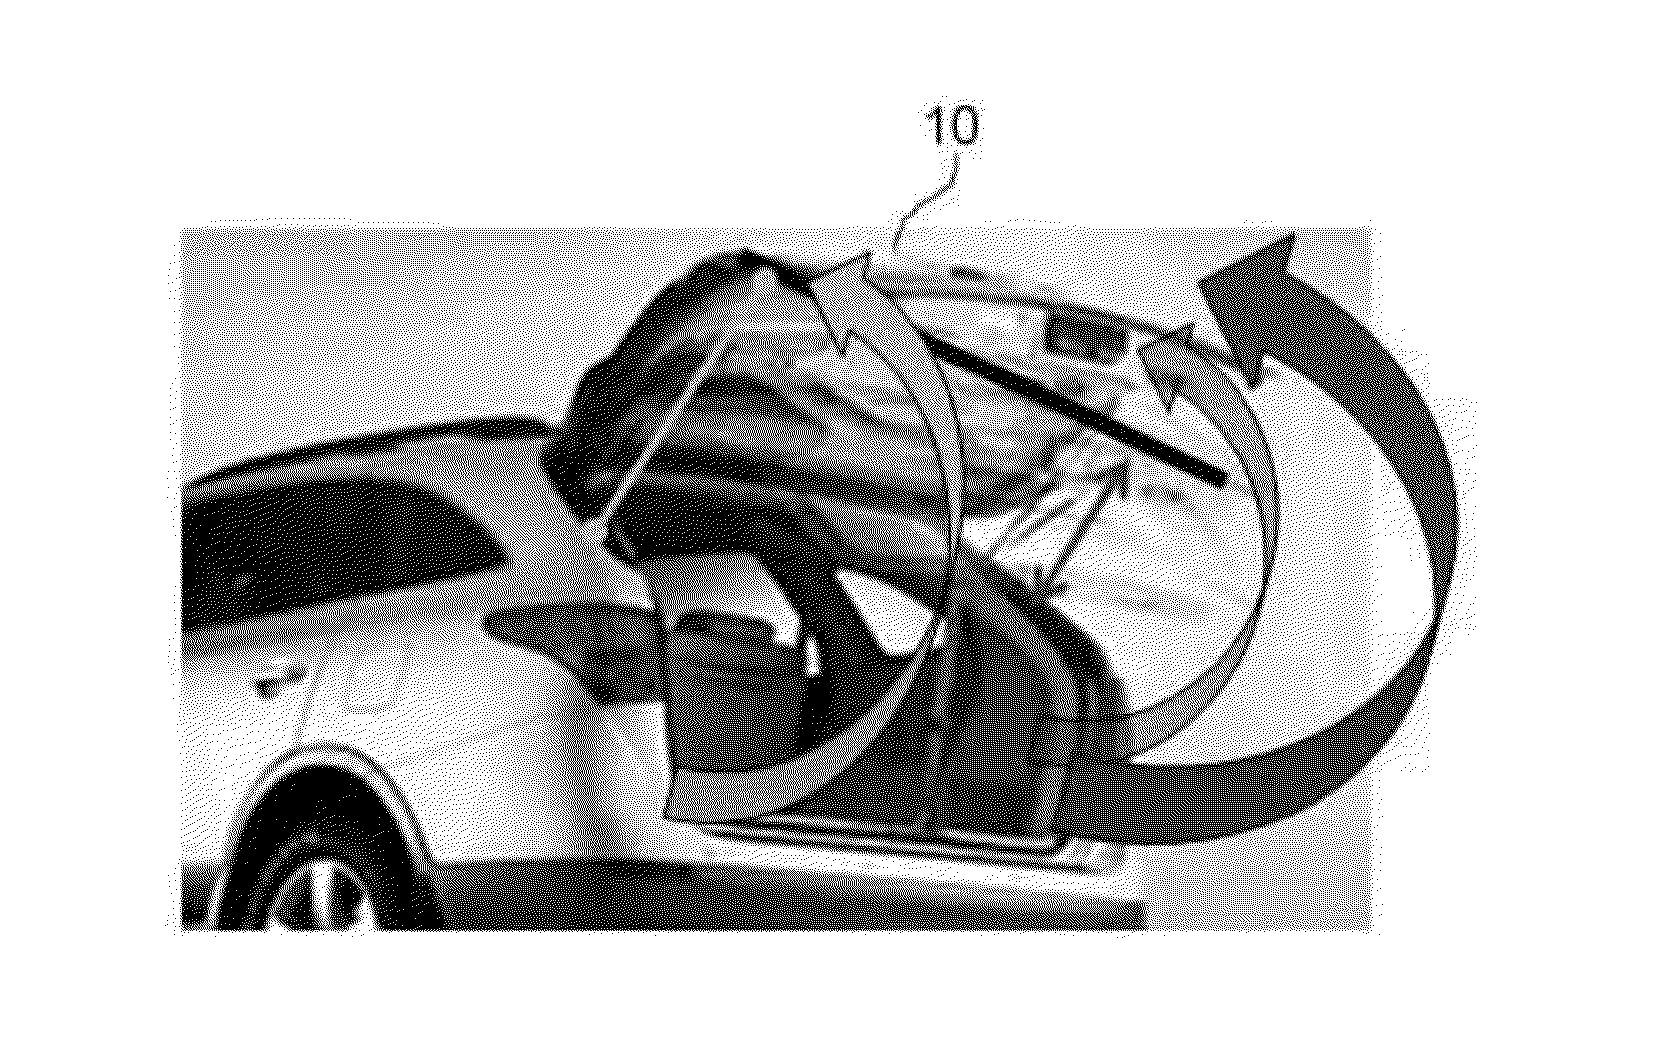 Method of controlling power trunk or power tailgate with synchronization procedure between left and right spindles